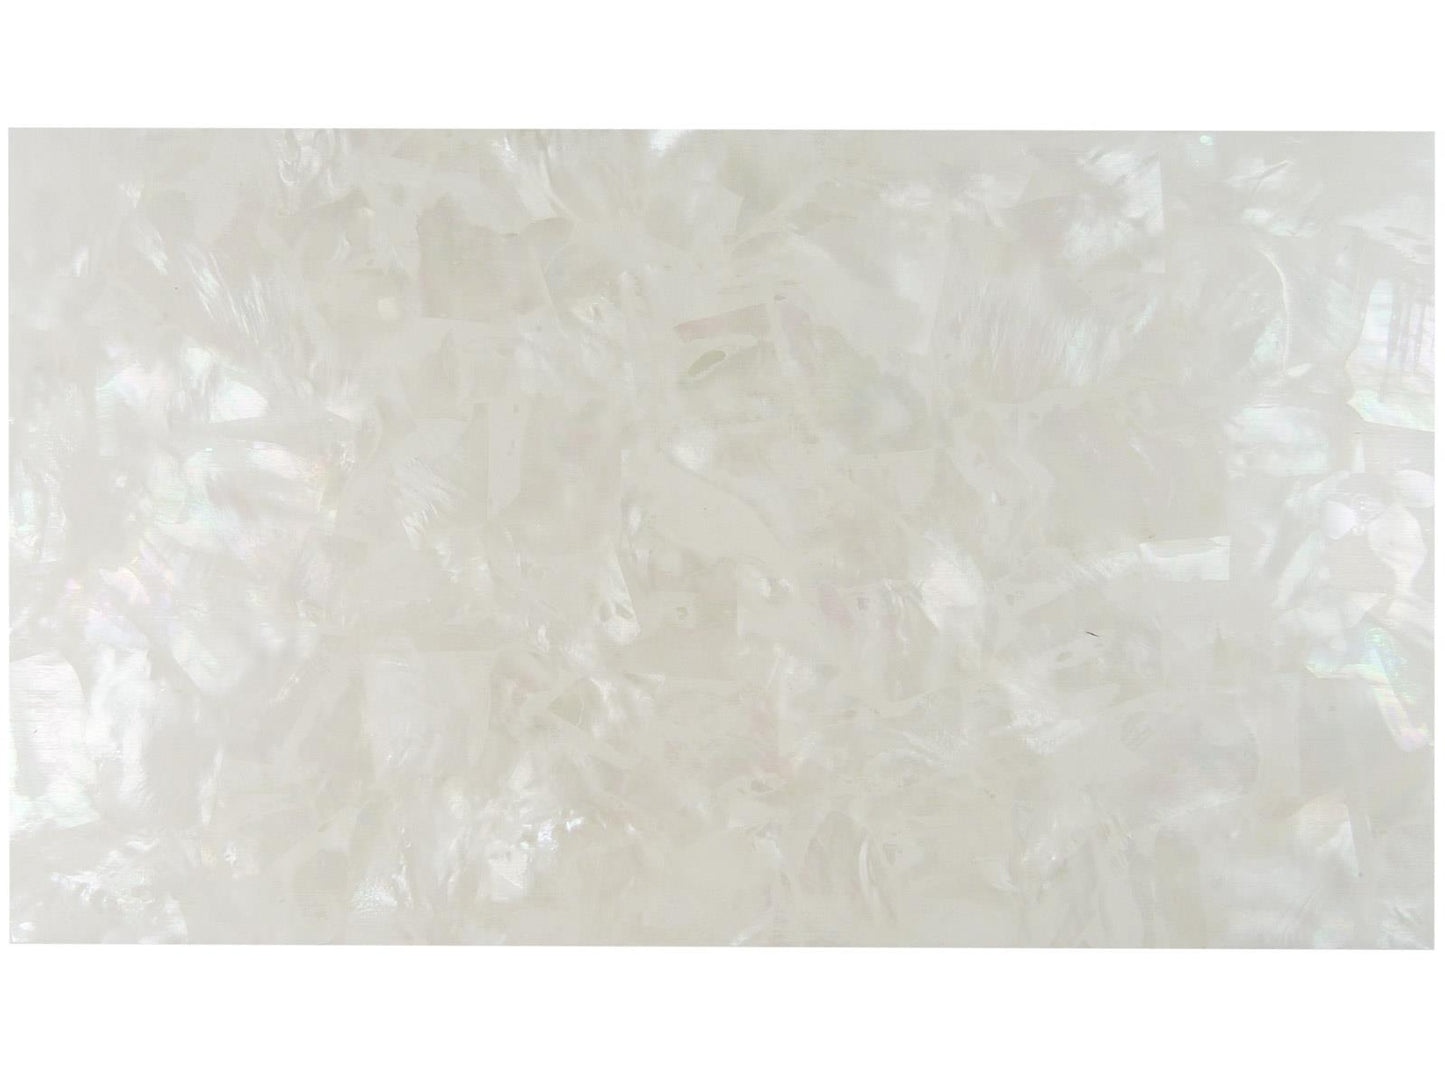 Incudo White Shard Mother of Pearl Laminate Shell Veneer - 240x140x0.15mm